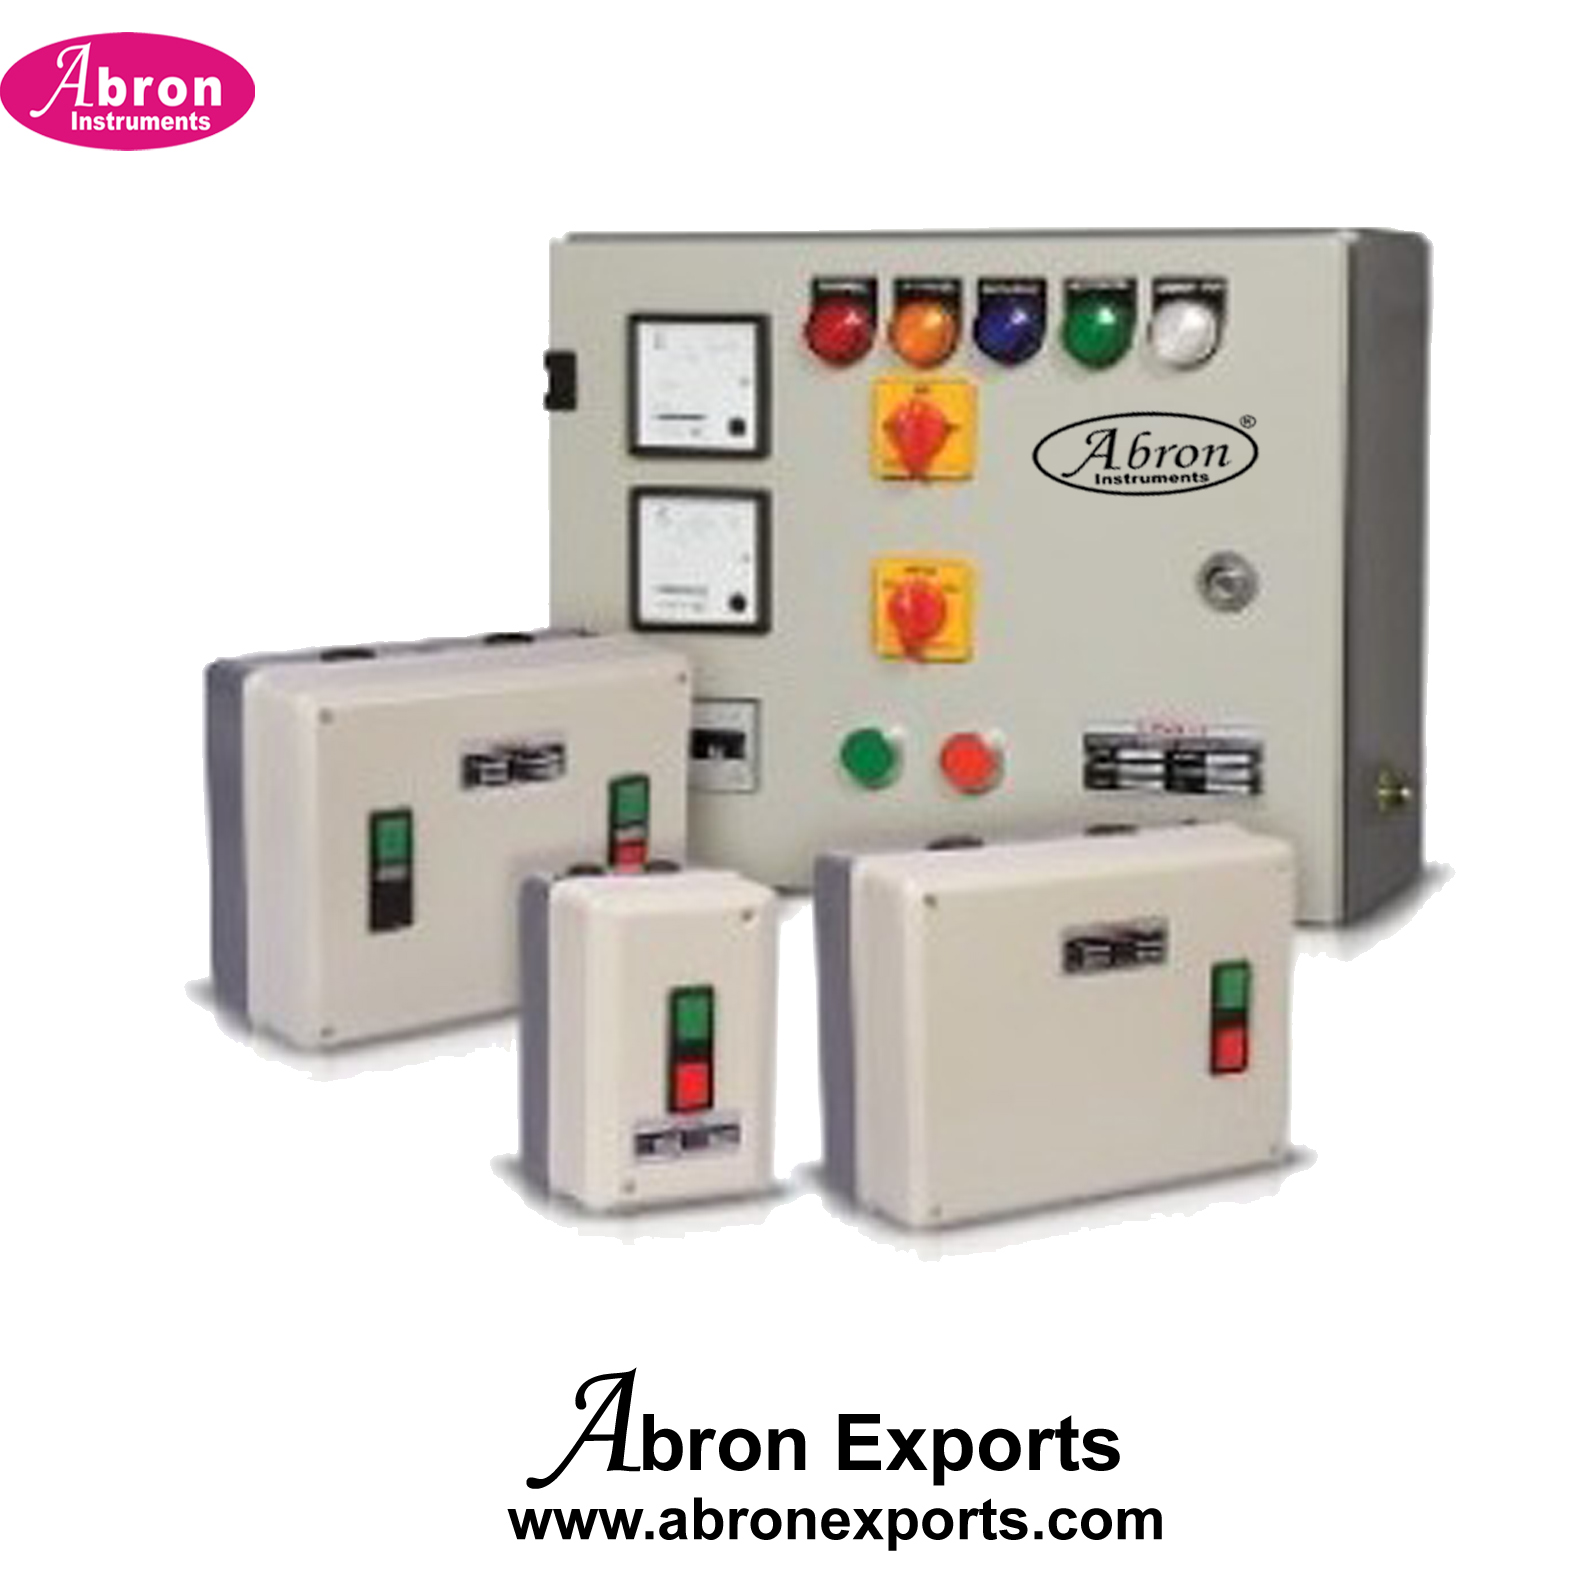 Motor DC Motor Starters 1or 2 or 3 or  4 Point Explosion Proof Steet Box Abron AE-8462S1-4 